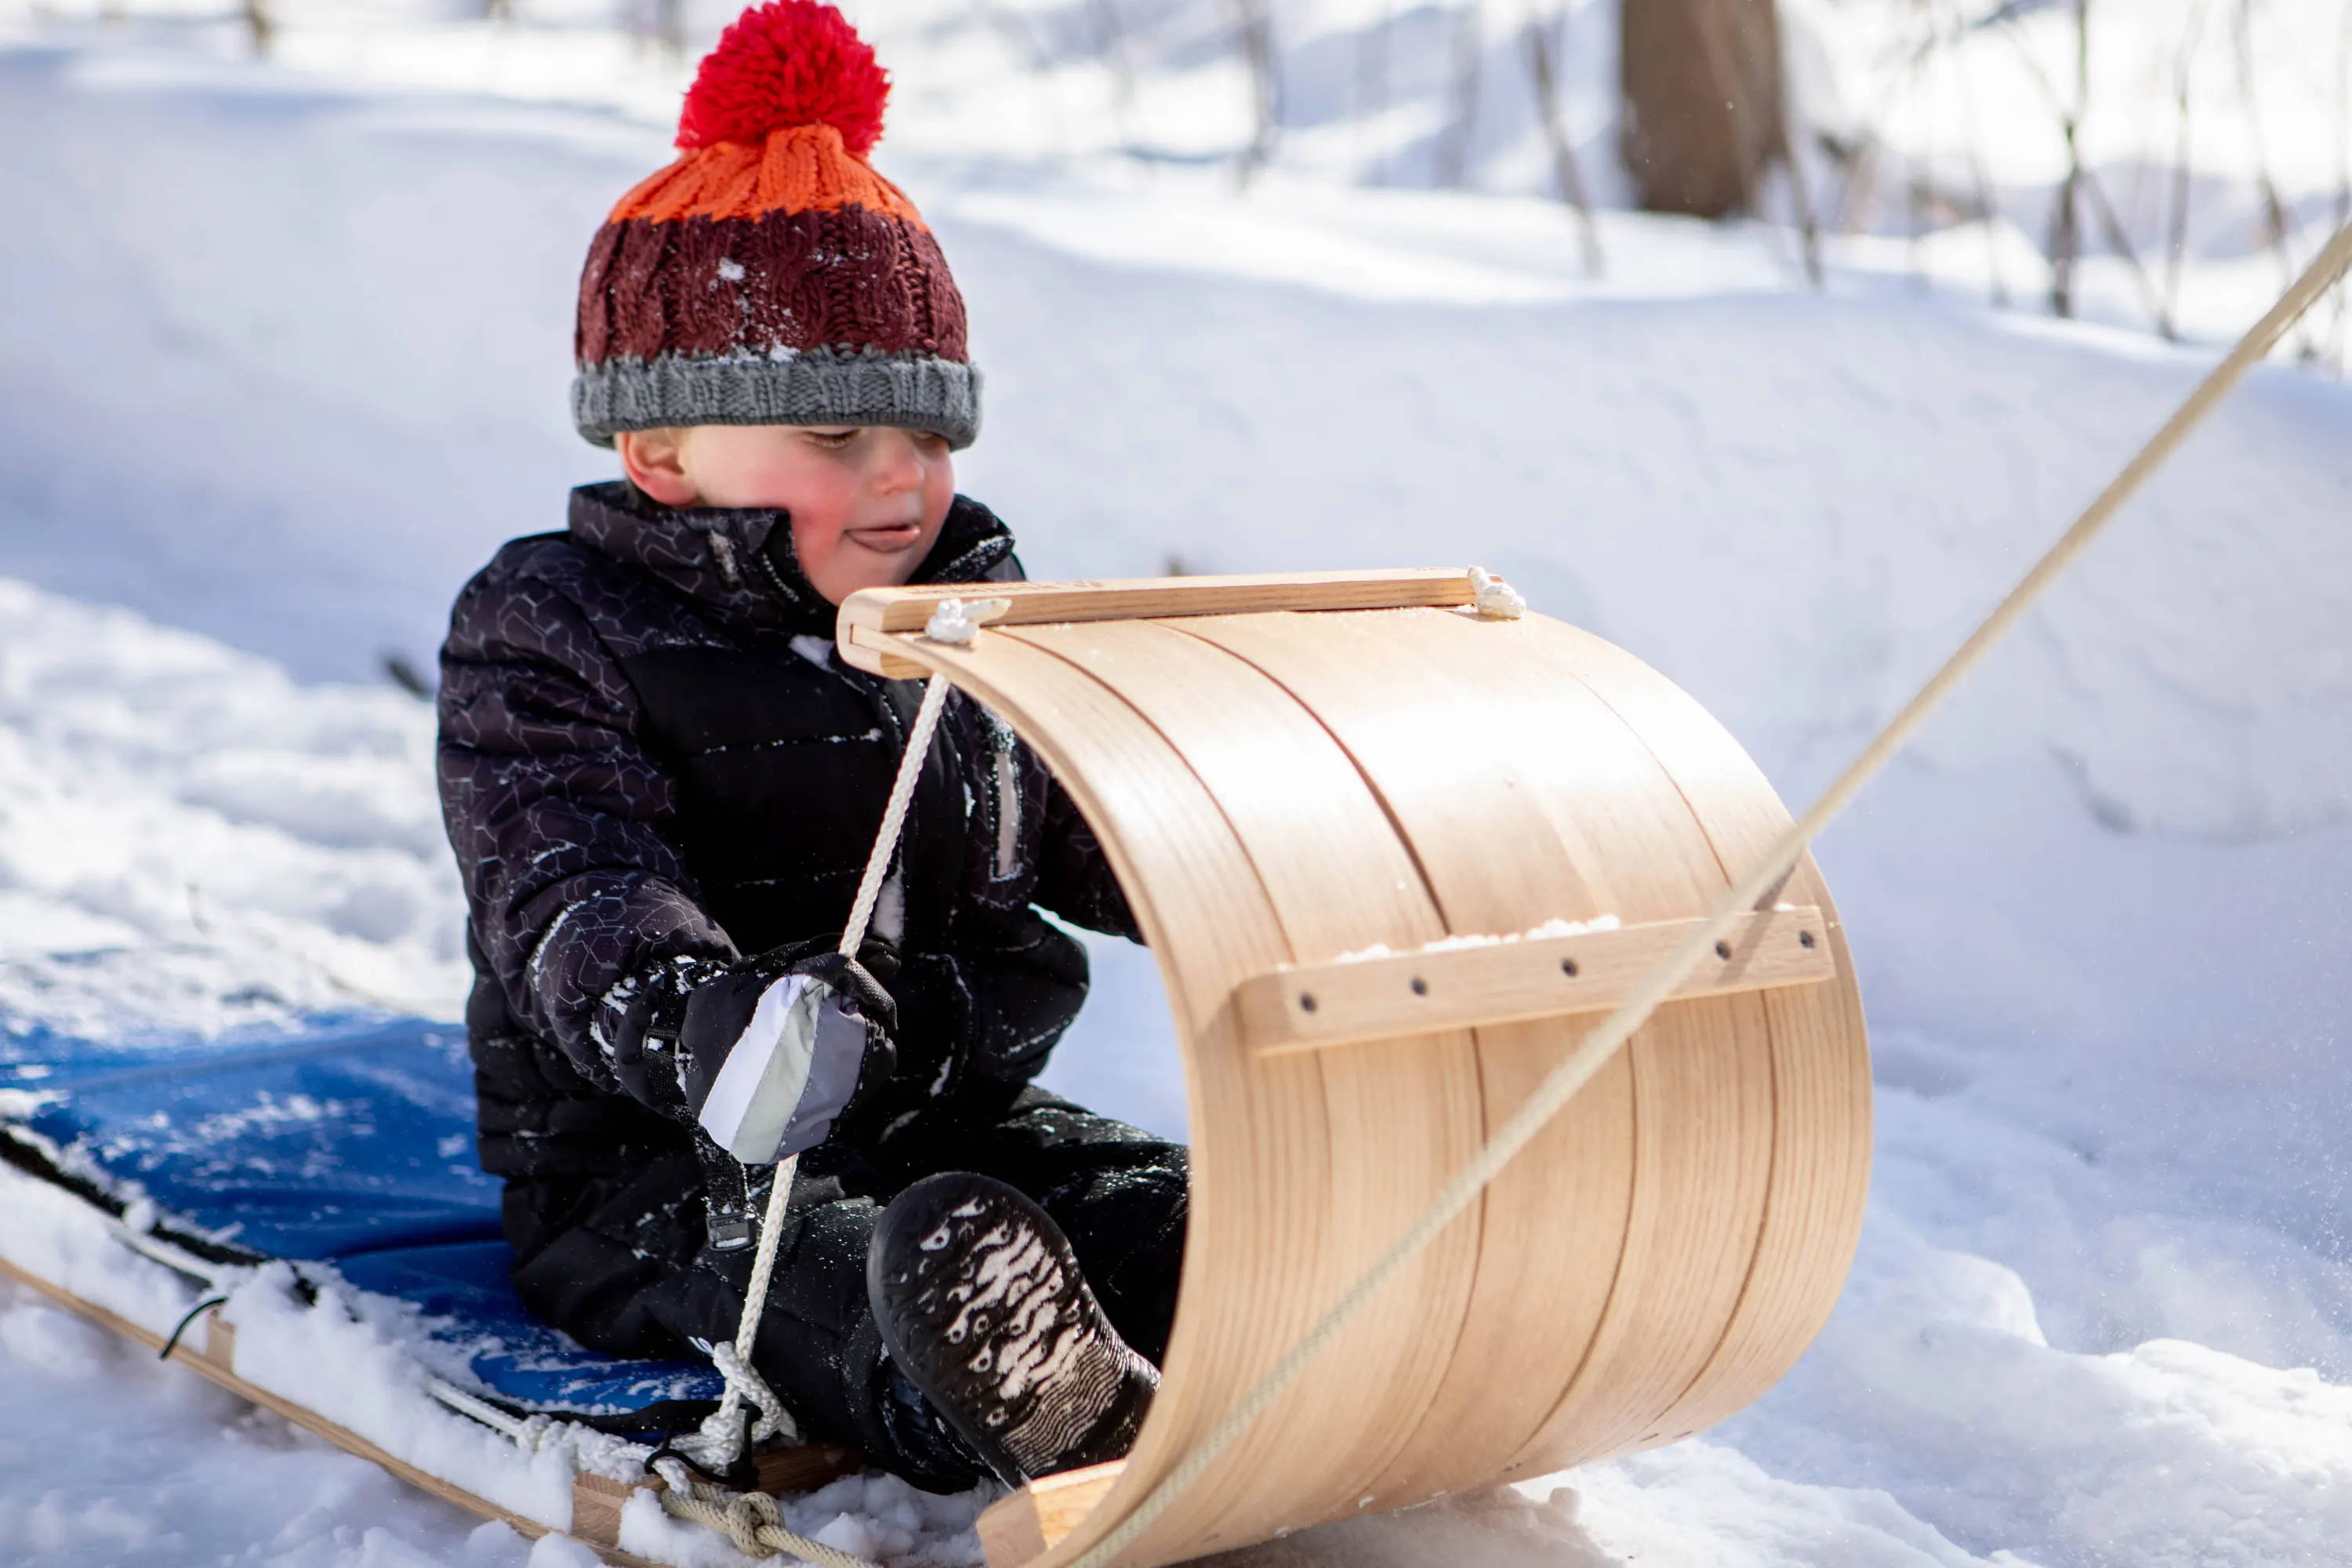 Handcrafted by Northern Toboggan Snow Day & Christmas Great Xmas Gift Classic Downhill Two Person Tobaggon Premium Quality Outdoor Sleds Wooden Toboggan Snow Sled for Kids & Adults 